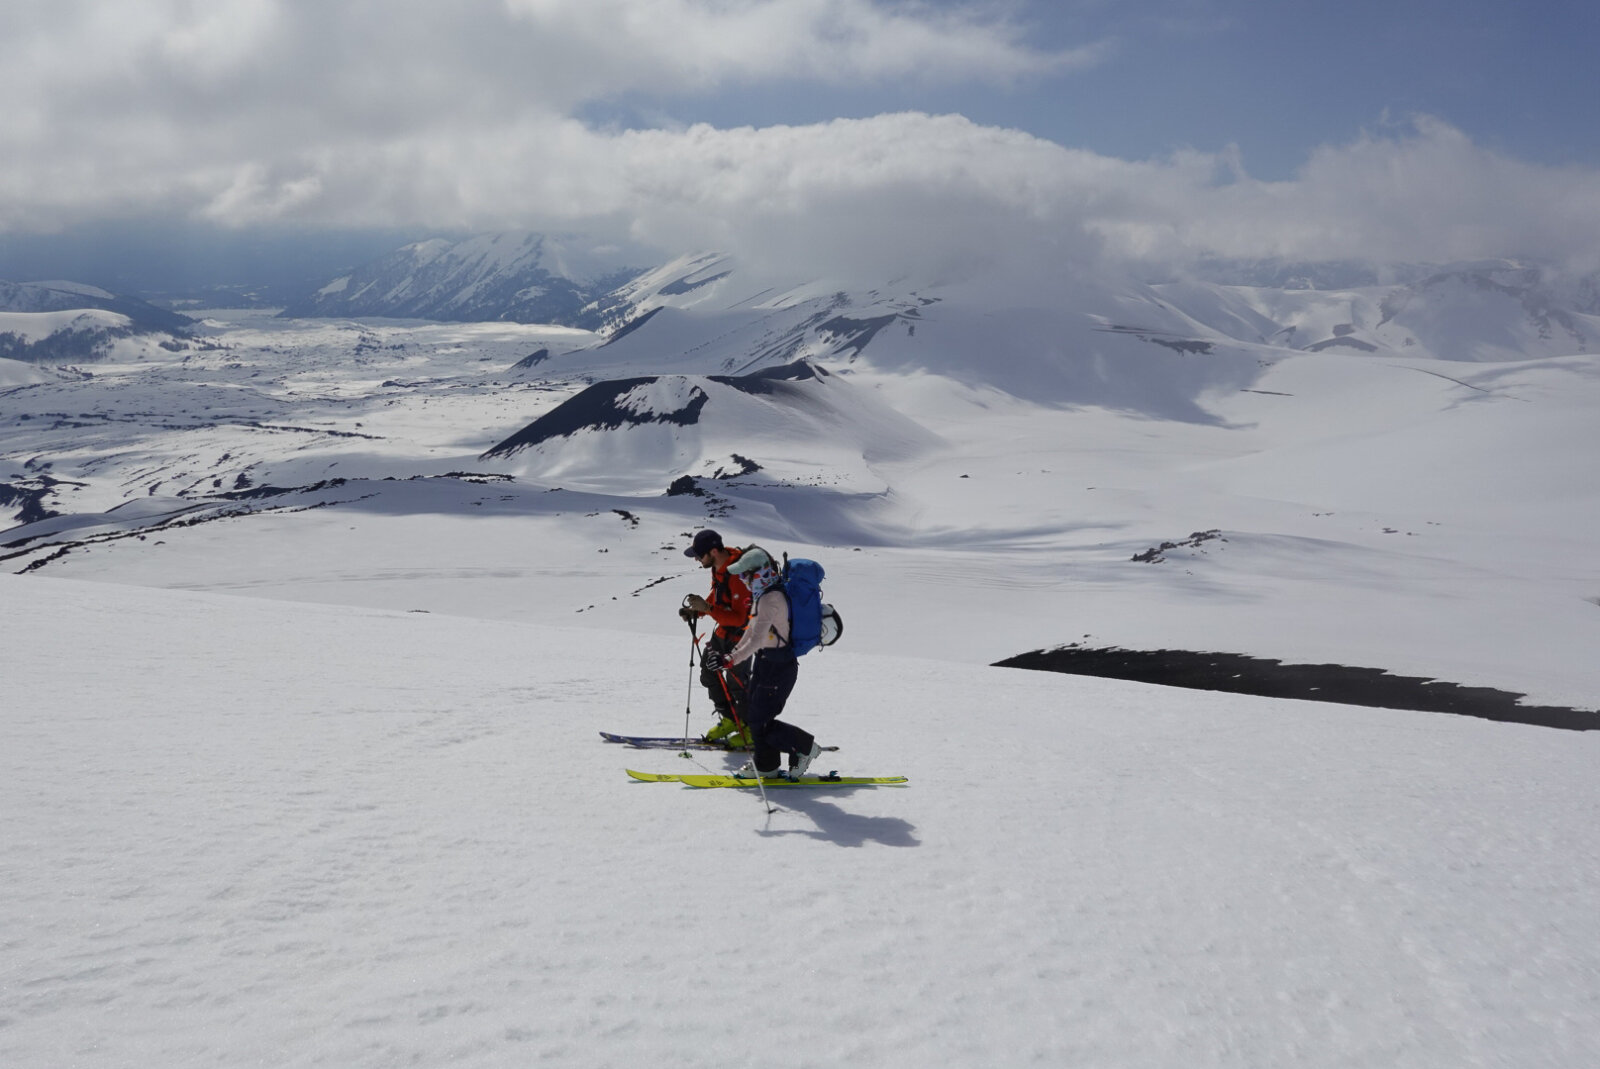 Professionally guided ski mountaineering trips in Chile. skiing in chile, ski chile, ski mountaineering in chile, splitboarding in chile, chile skiing, backcountry skiing in chile, chile ski trip, chile snowboard trip, chile skiing itinerary, where to ski in chile, guided ski trip in chile